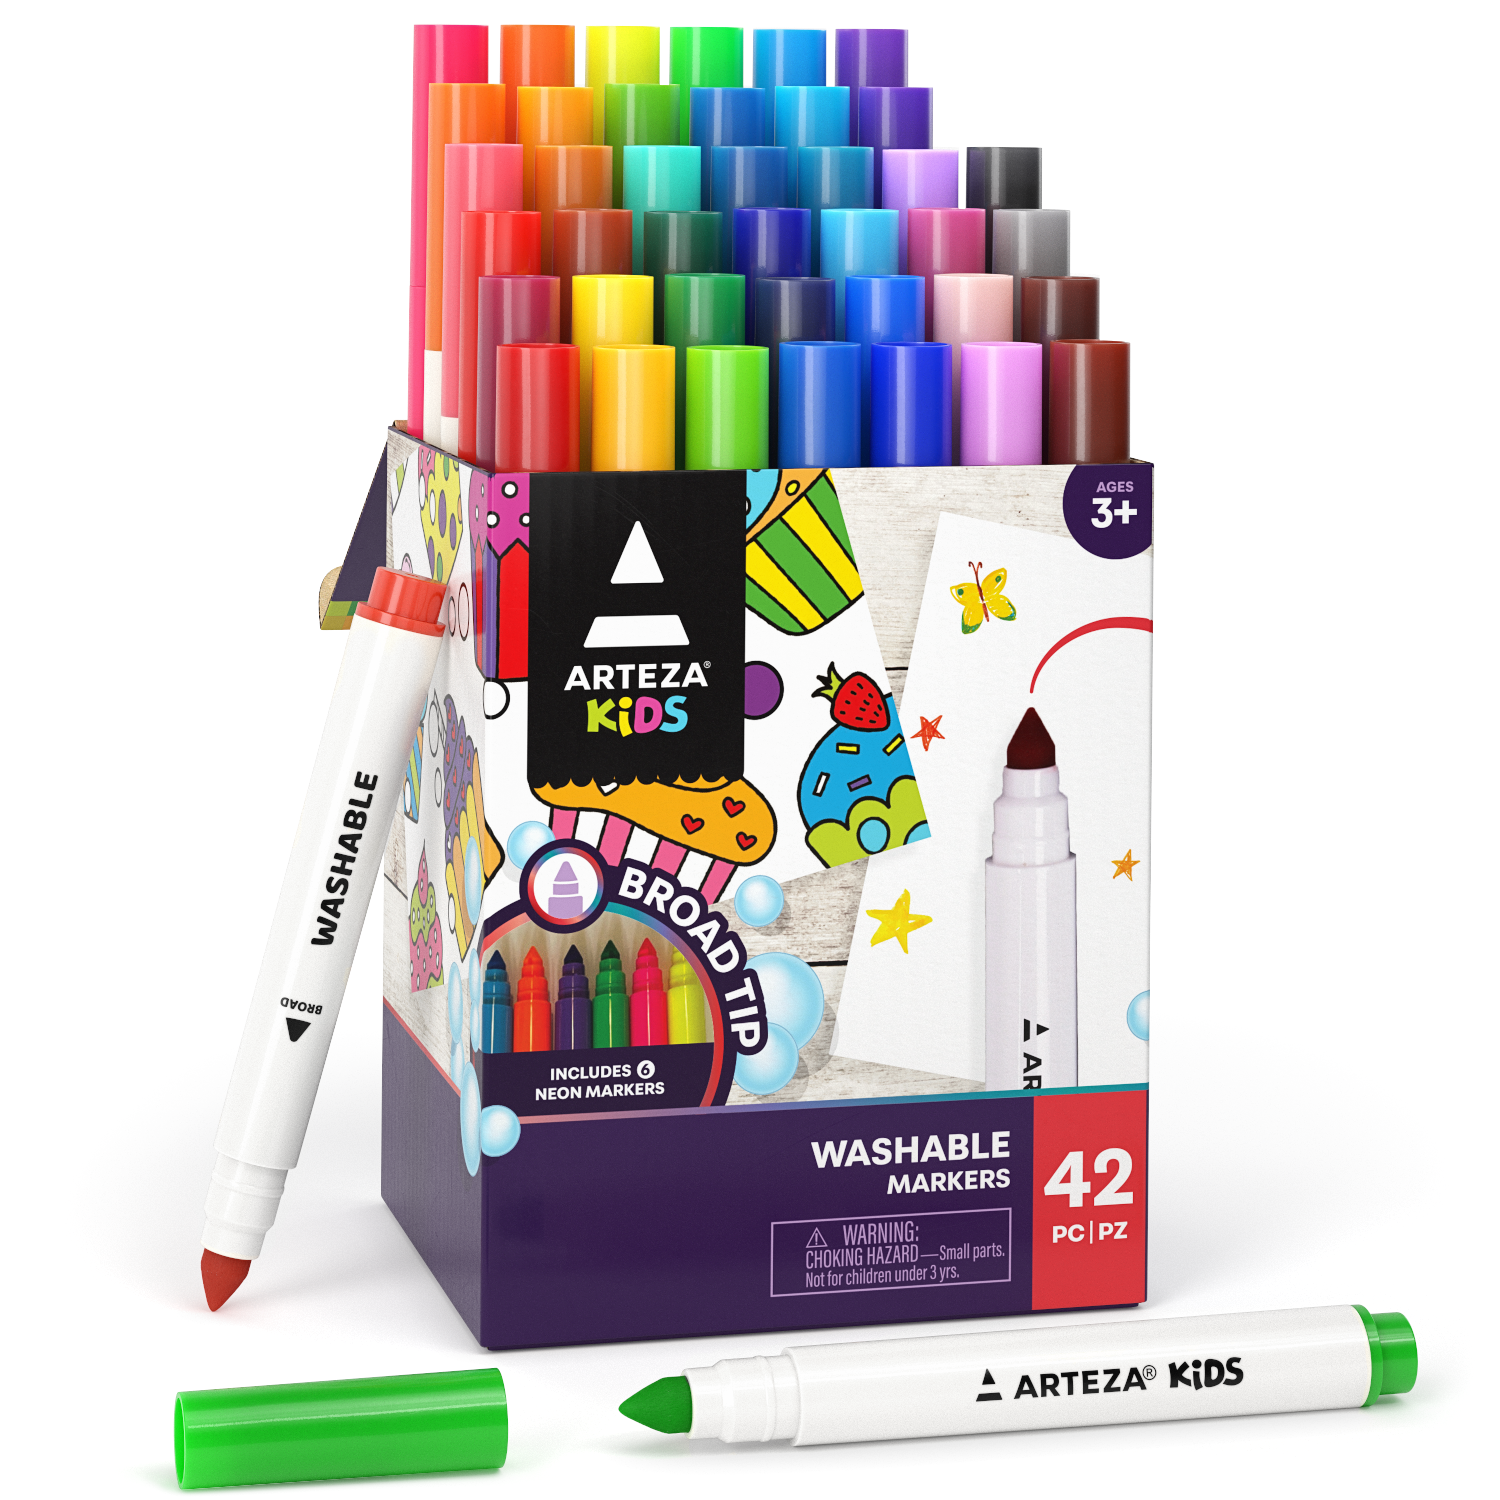 Dual Brush Marker Pens for Coloring Books, Tanmit Fine Tip